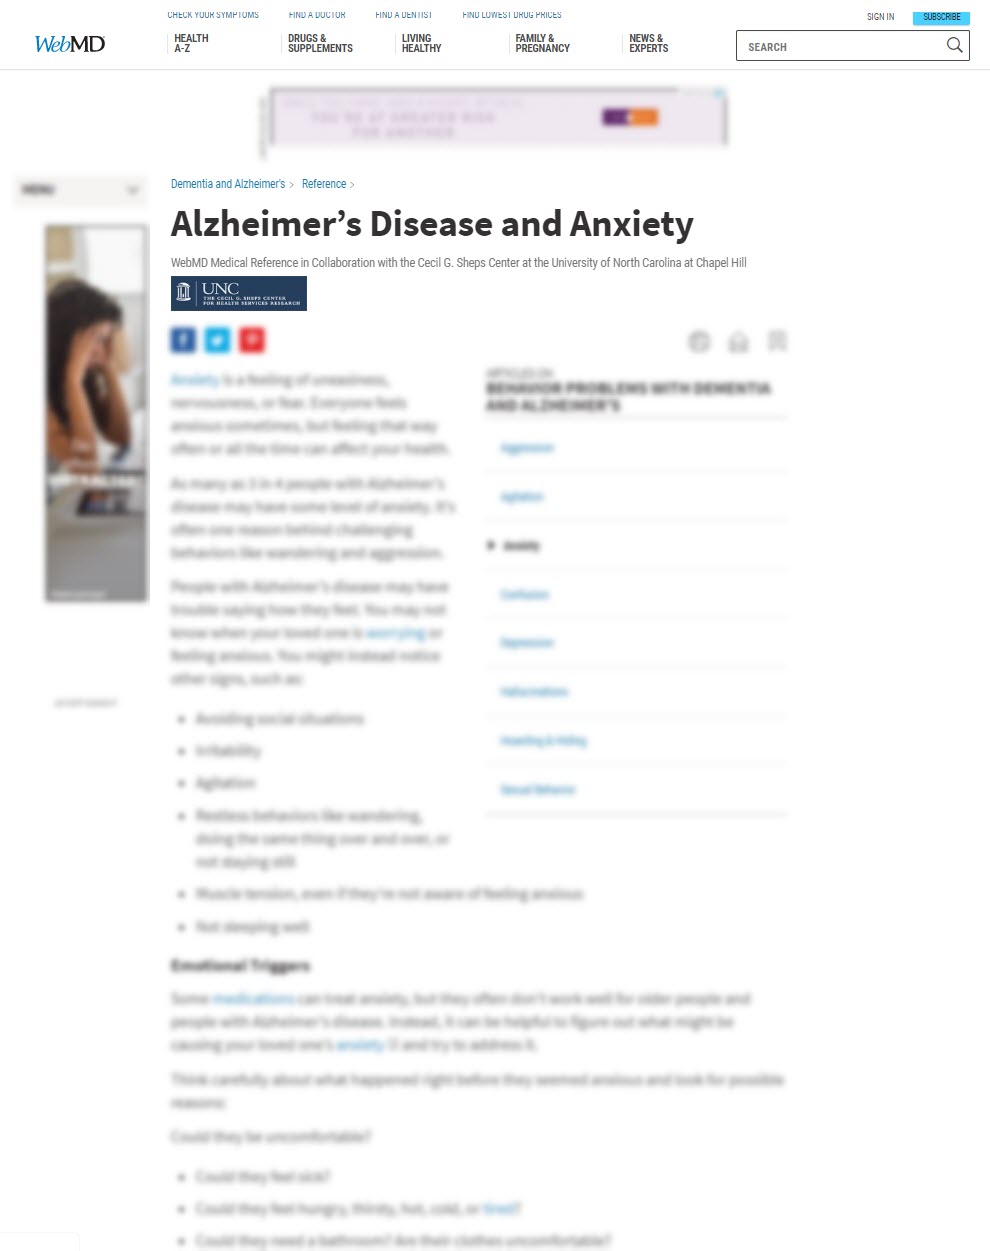 Alzheimer’s Disease and Anxiety